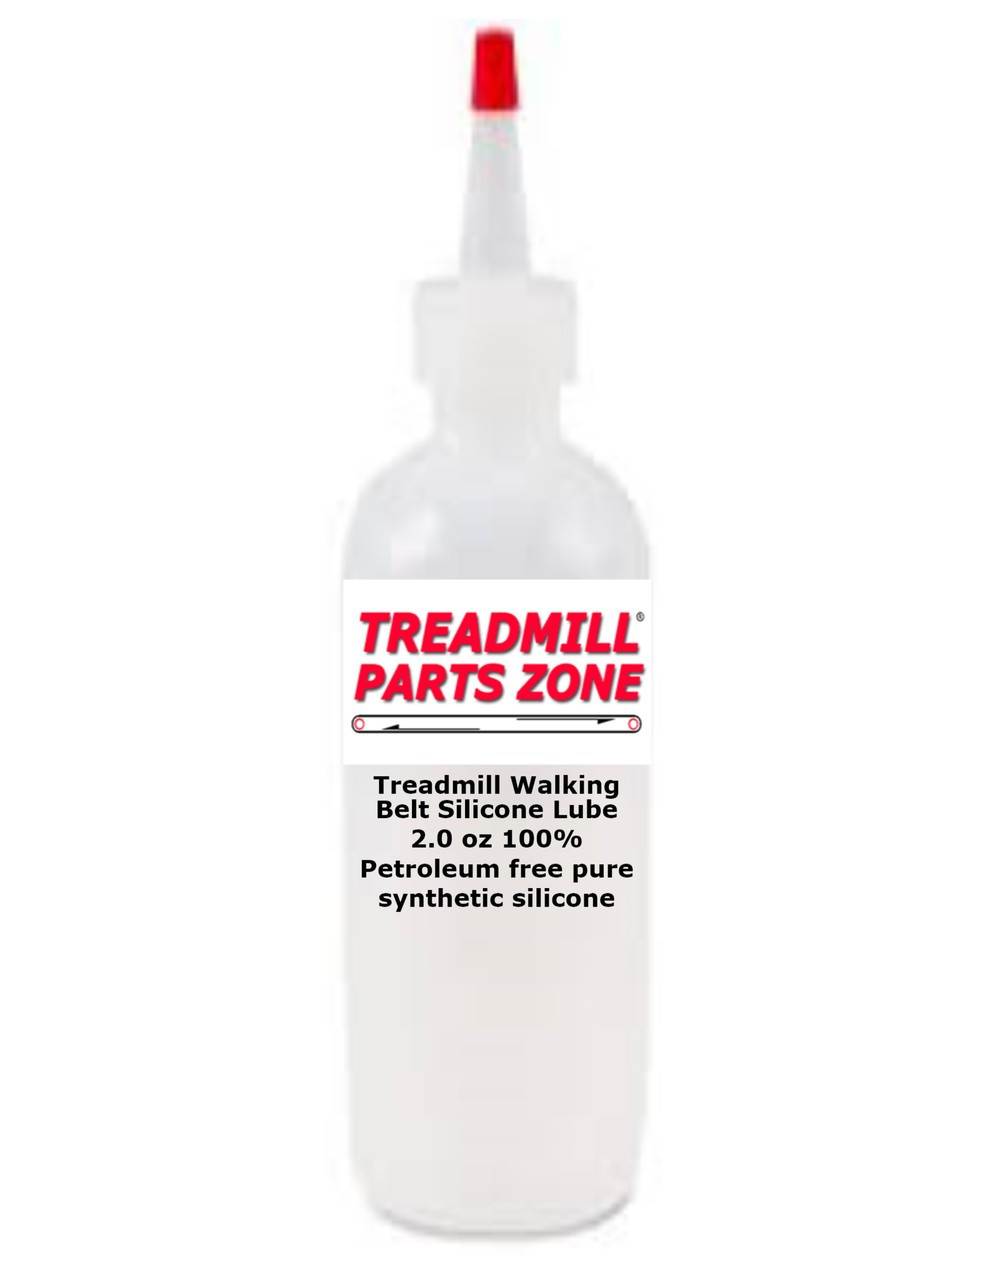 Treadmill Walking Belt Silicone Lube 2.0 oz 100% Petroleum free pure synthetic silicone